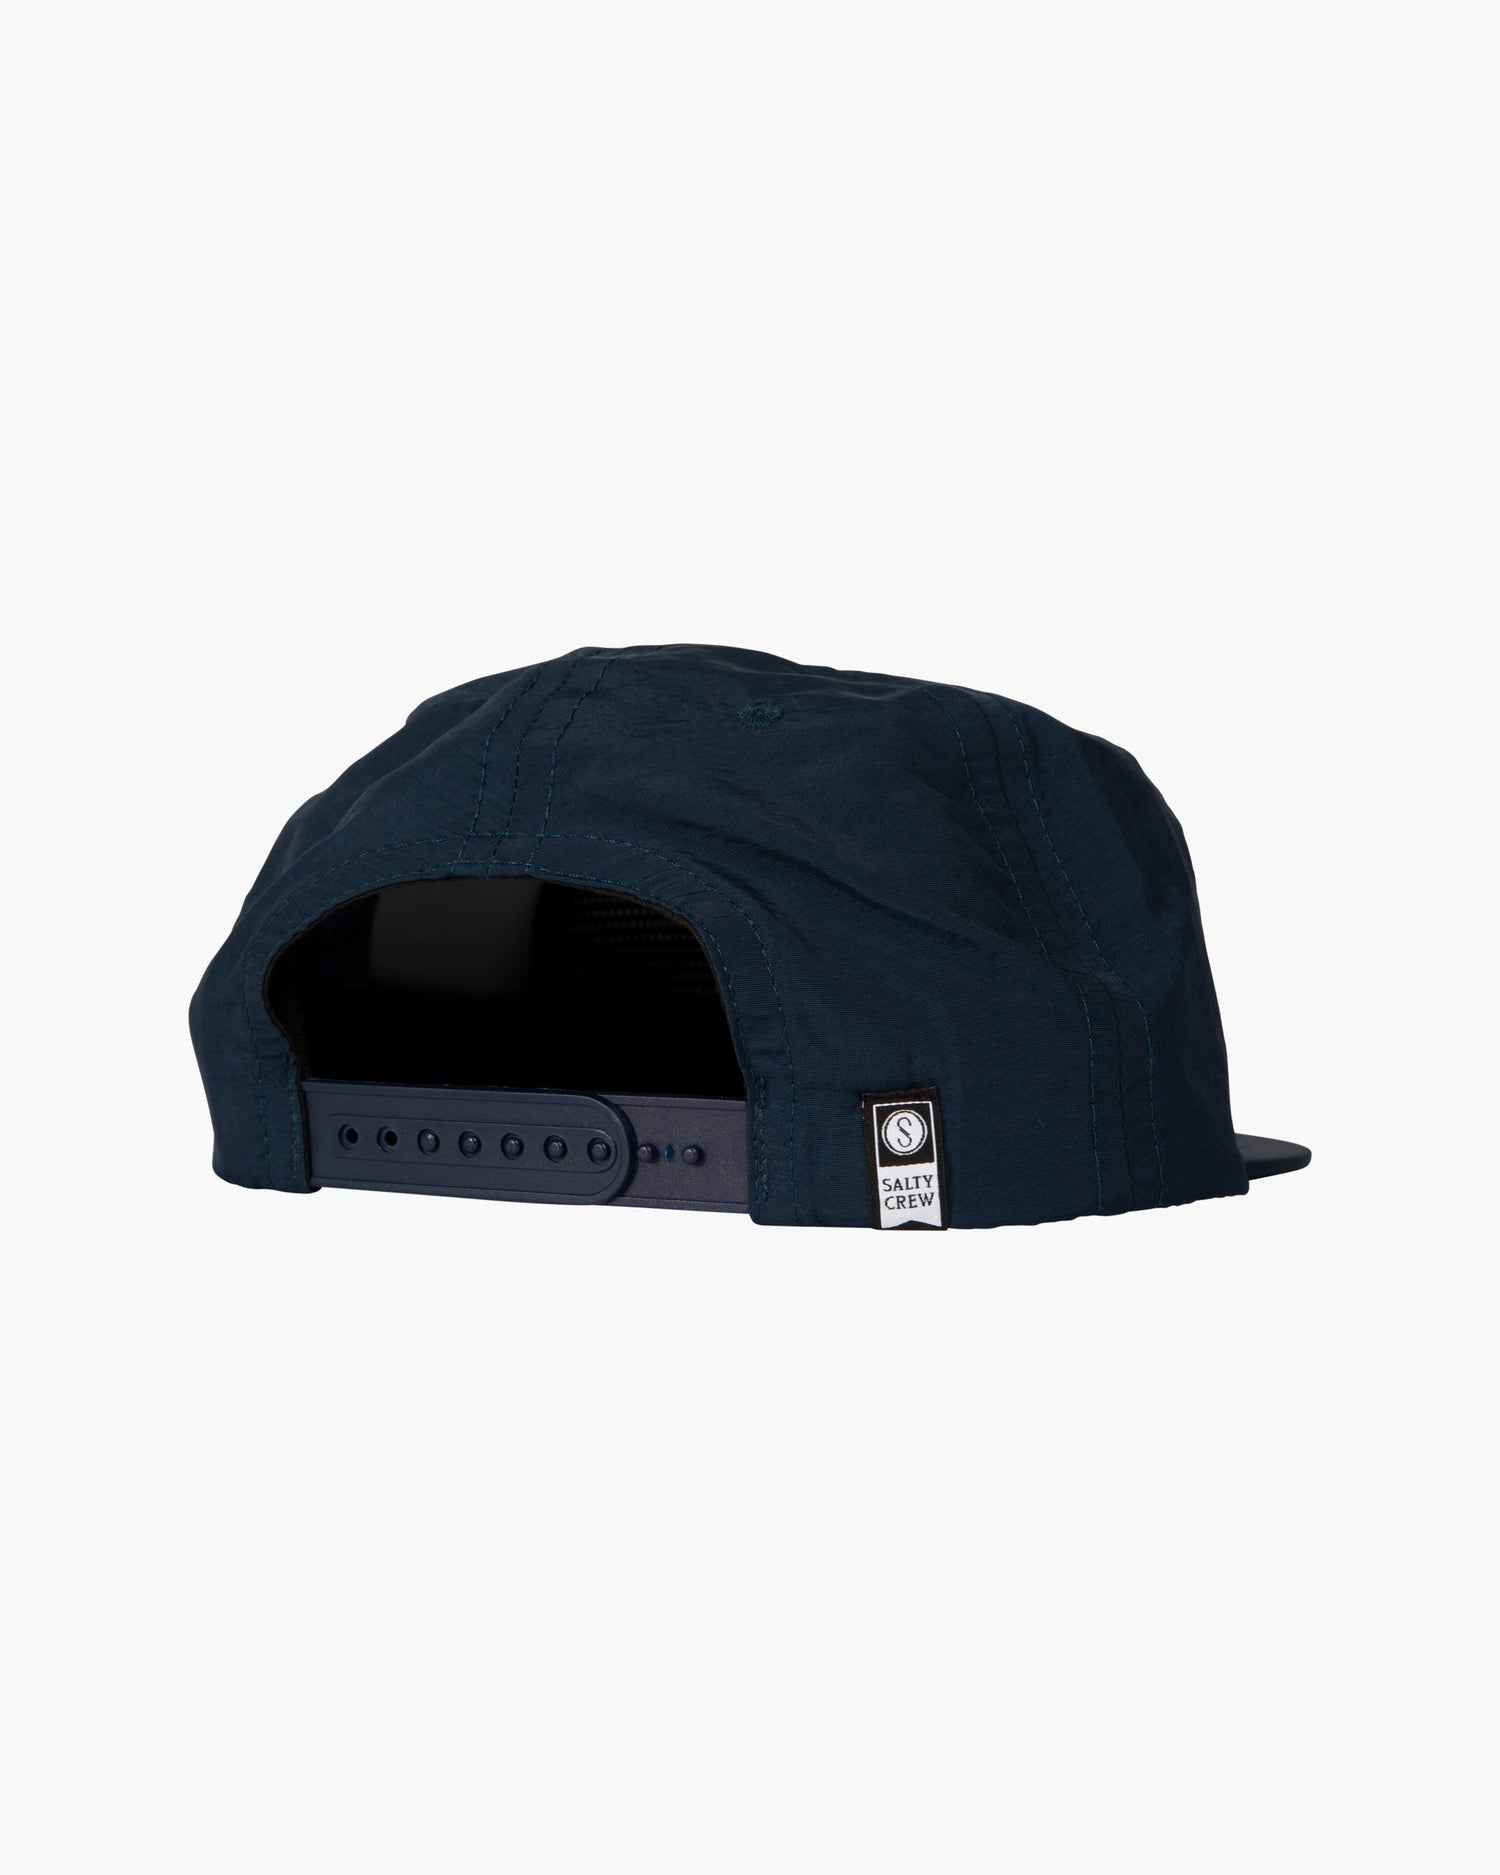 FIRST MATE 5 PANEL - Navy